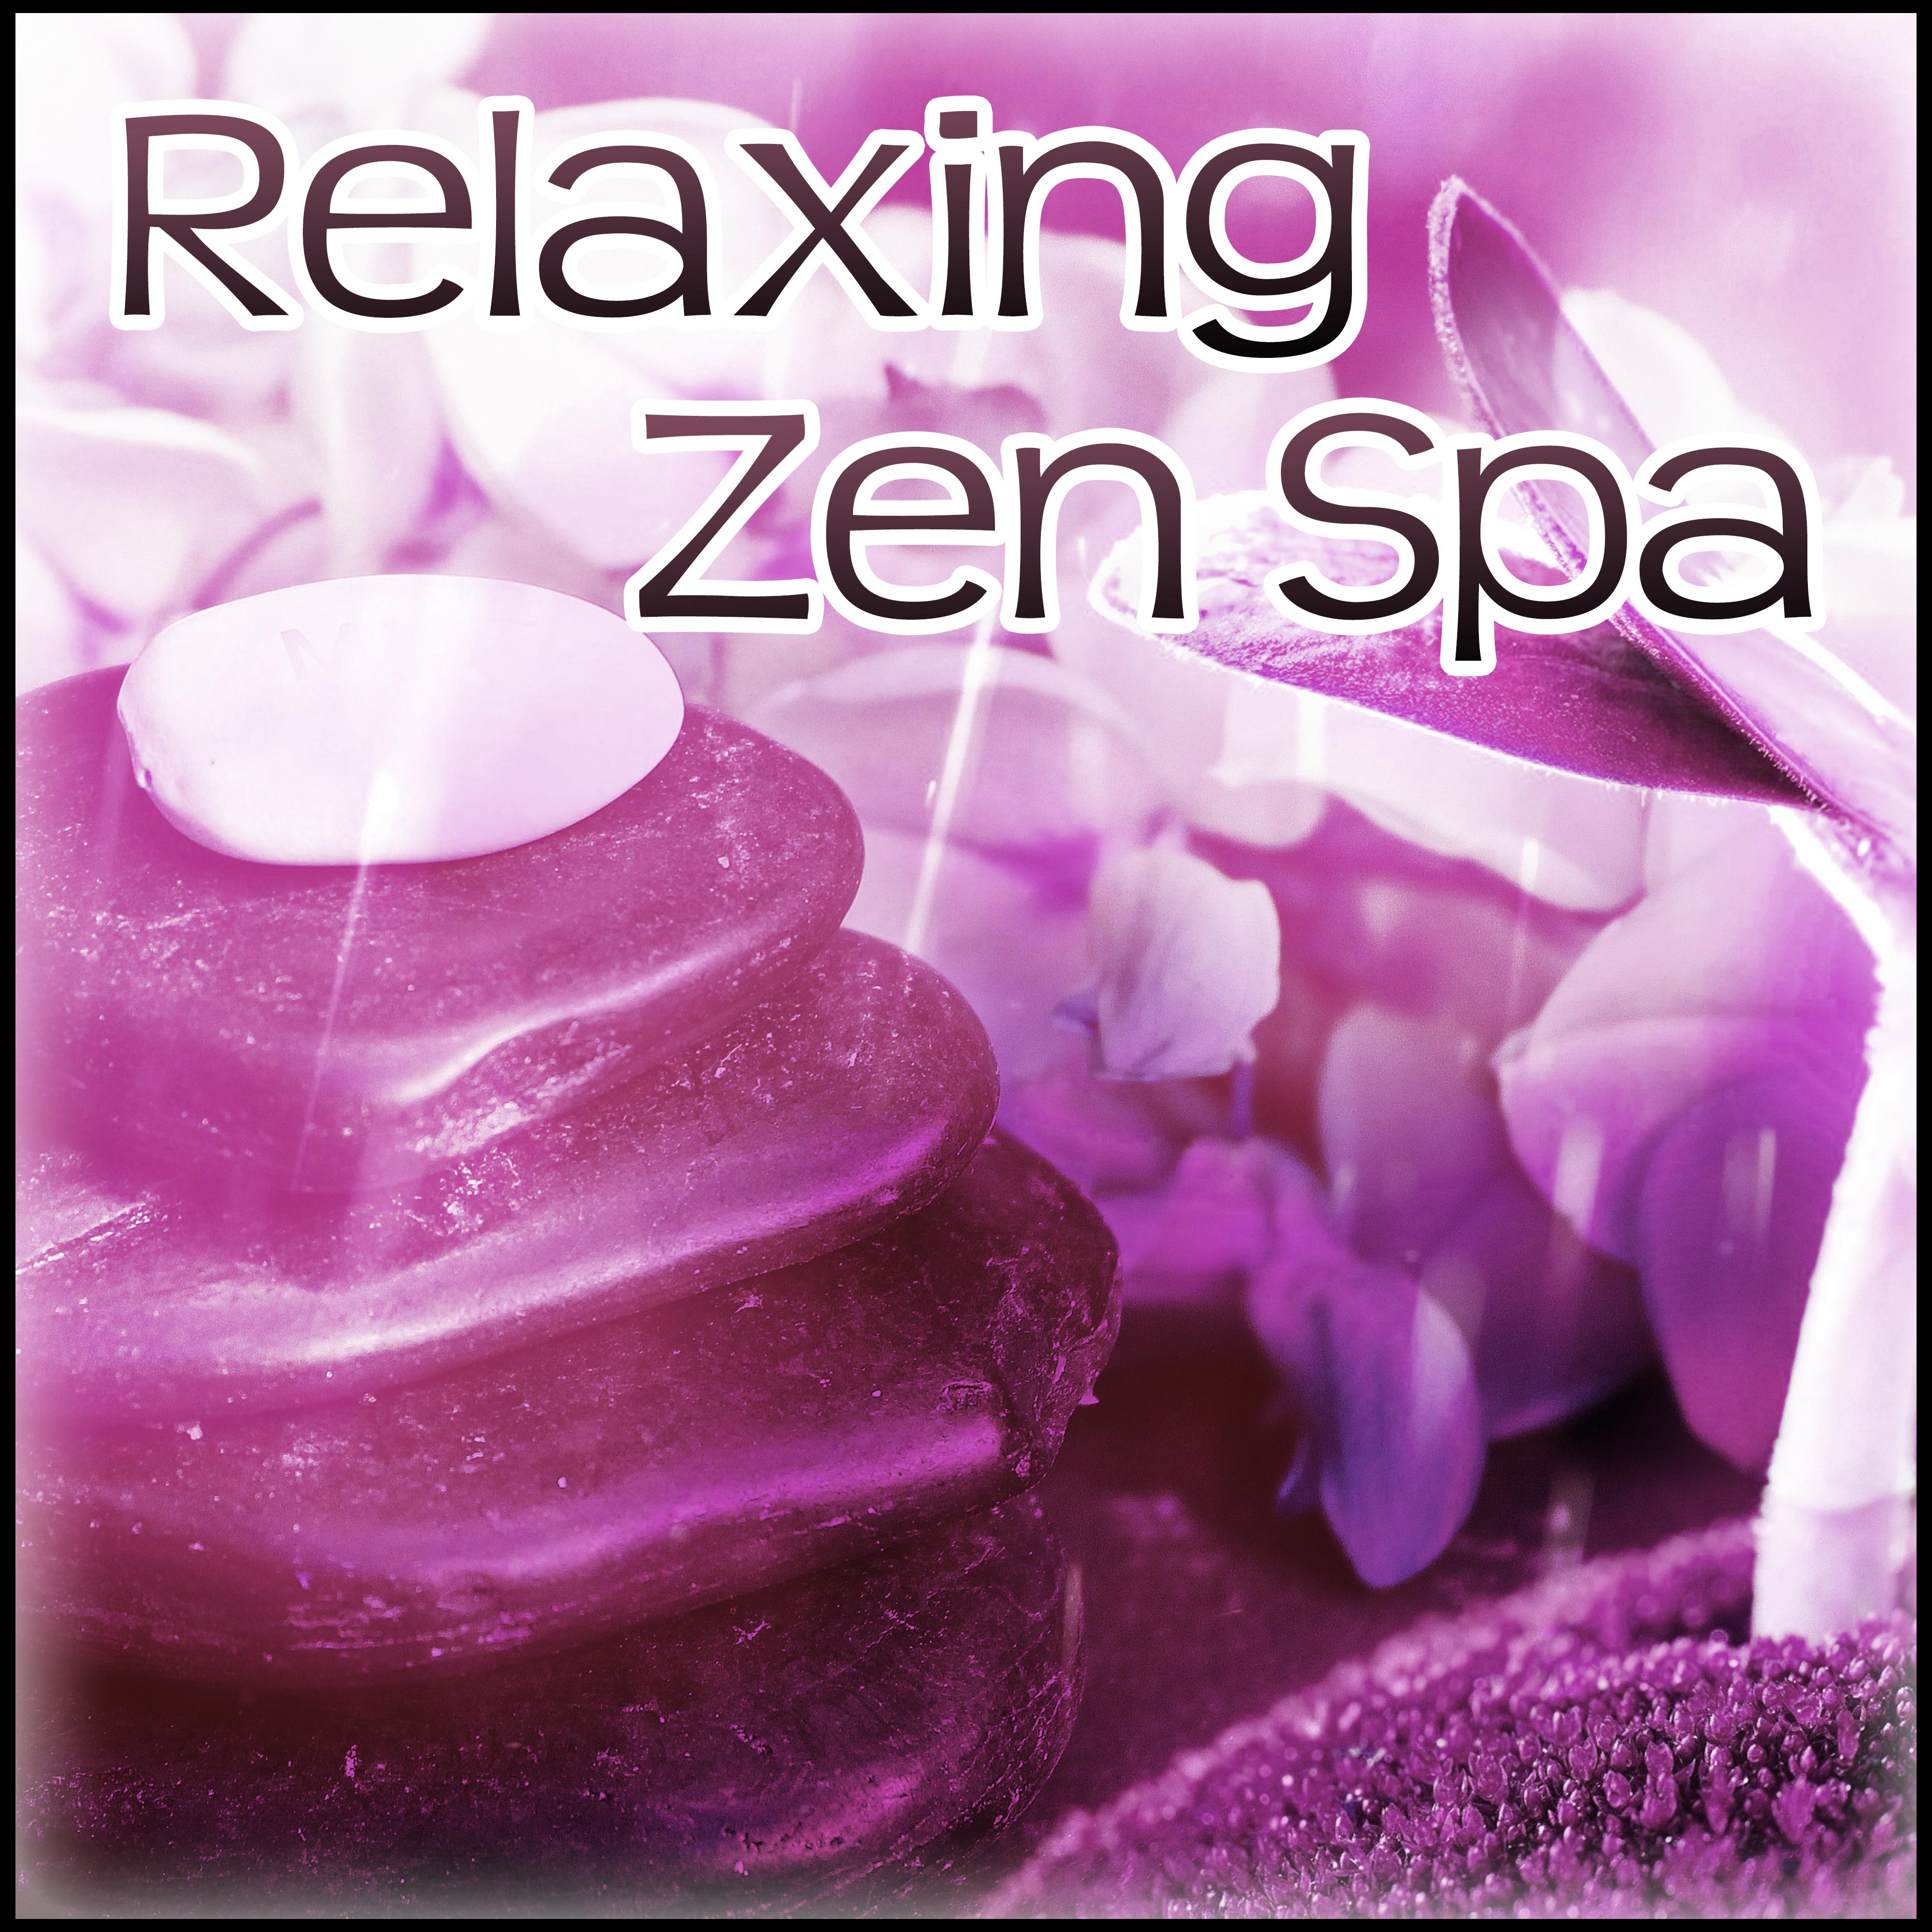 Relaxing Zen Spa  Wellness, Nature Sounds, Reiki, Yoga, Mindfulness, Meditation, Inner Silence, Deep Relaxation, Tranquility Spa